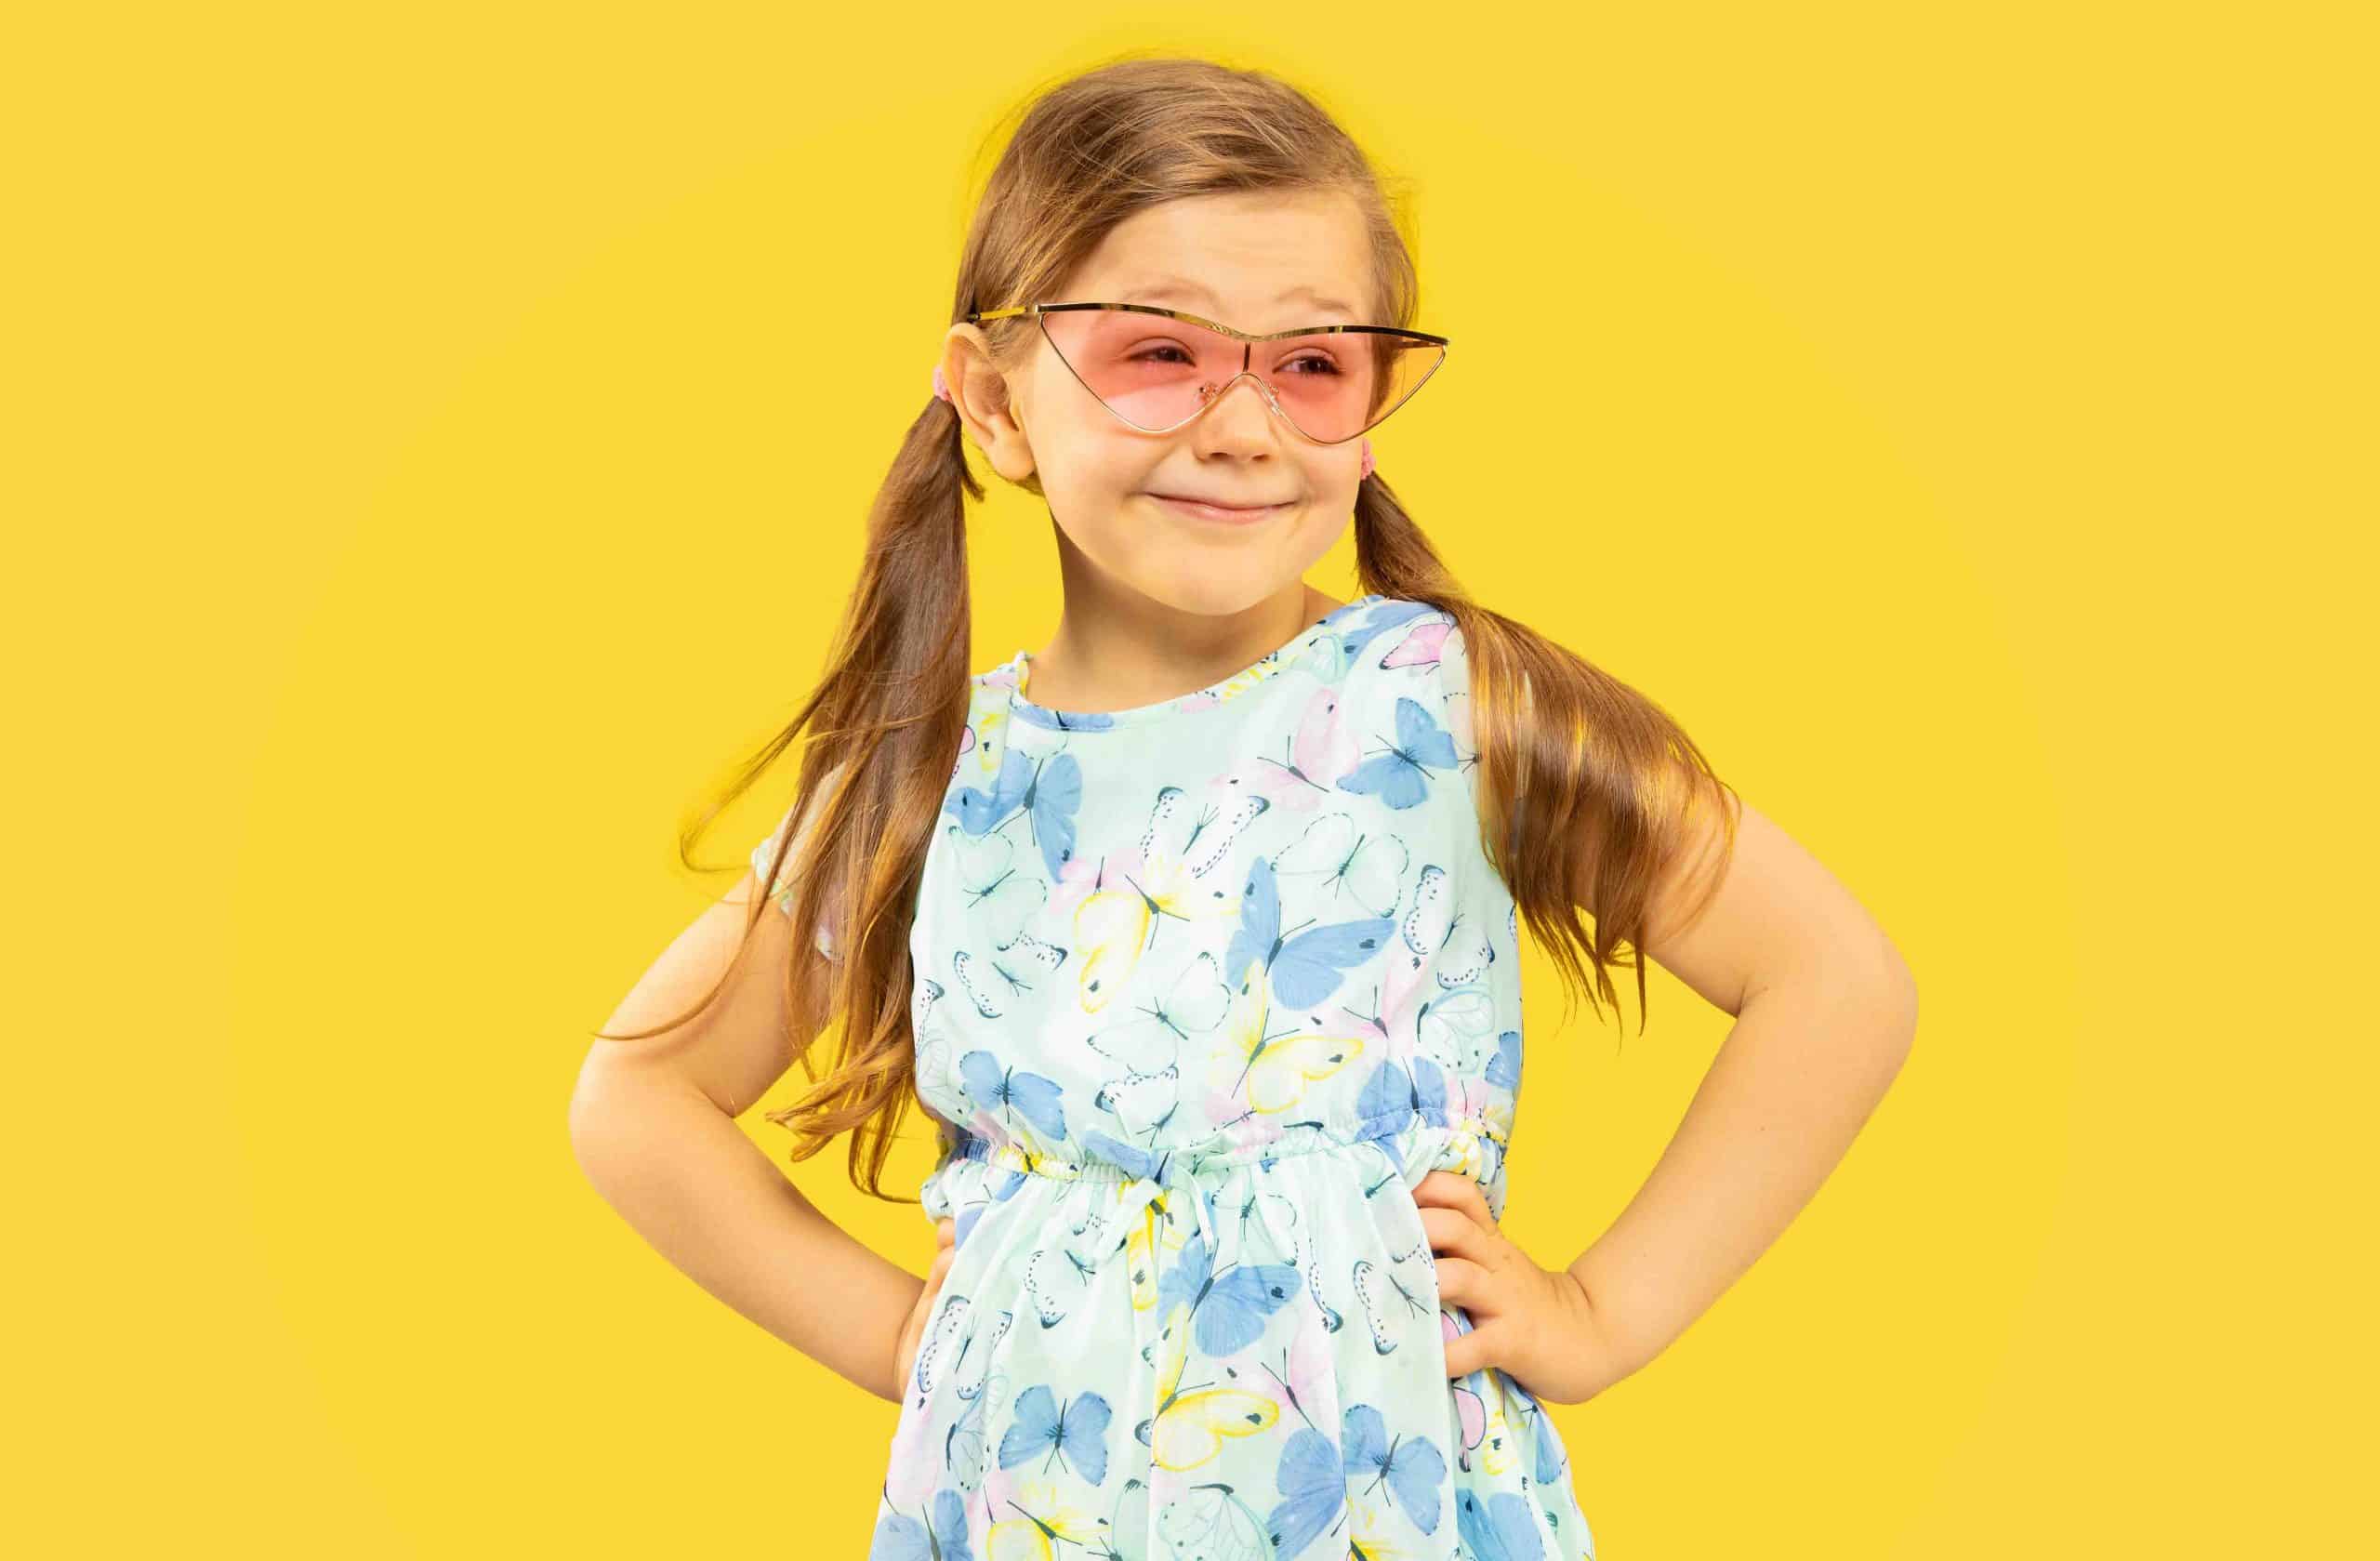 Teach Your Child How To Develop Their Sense Of Style